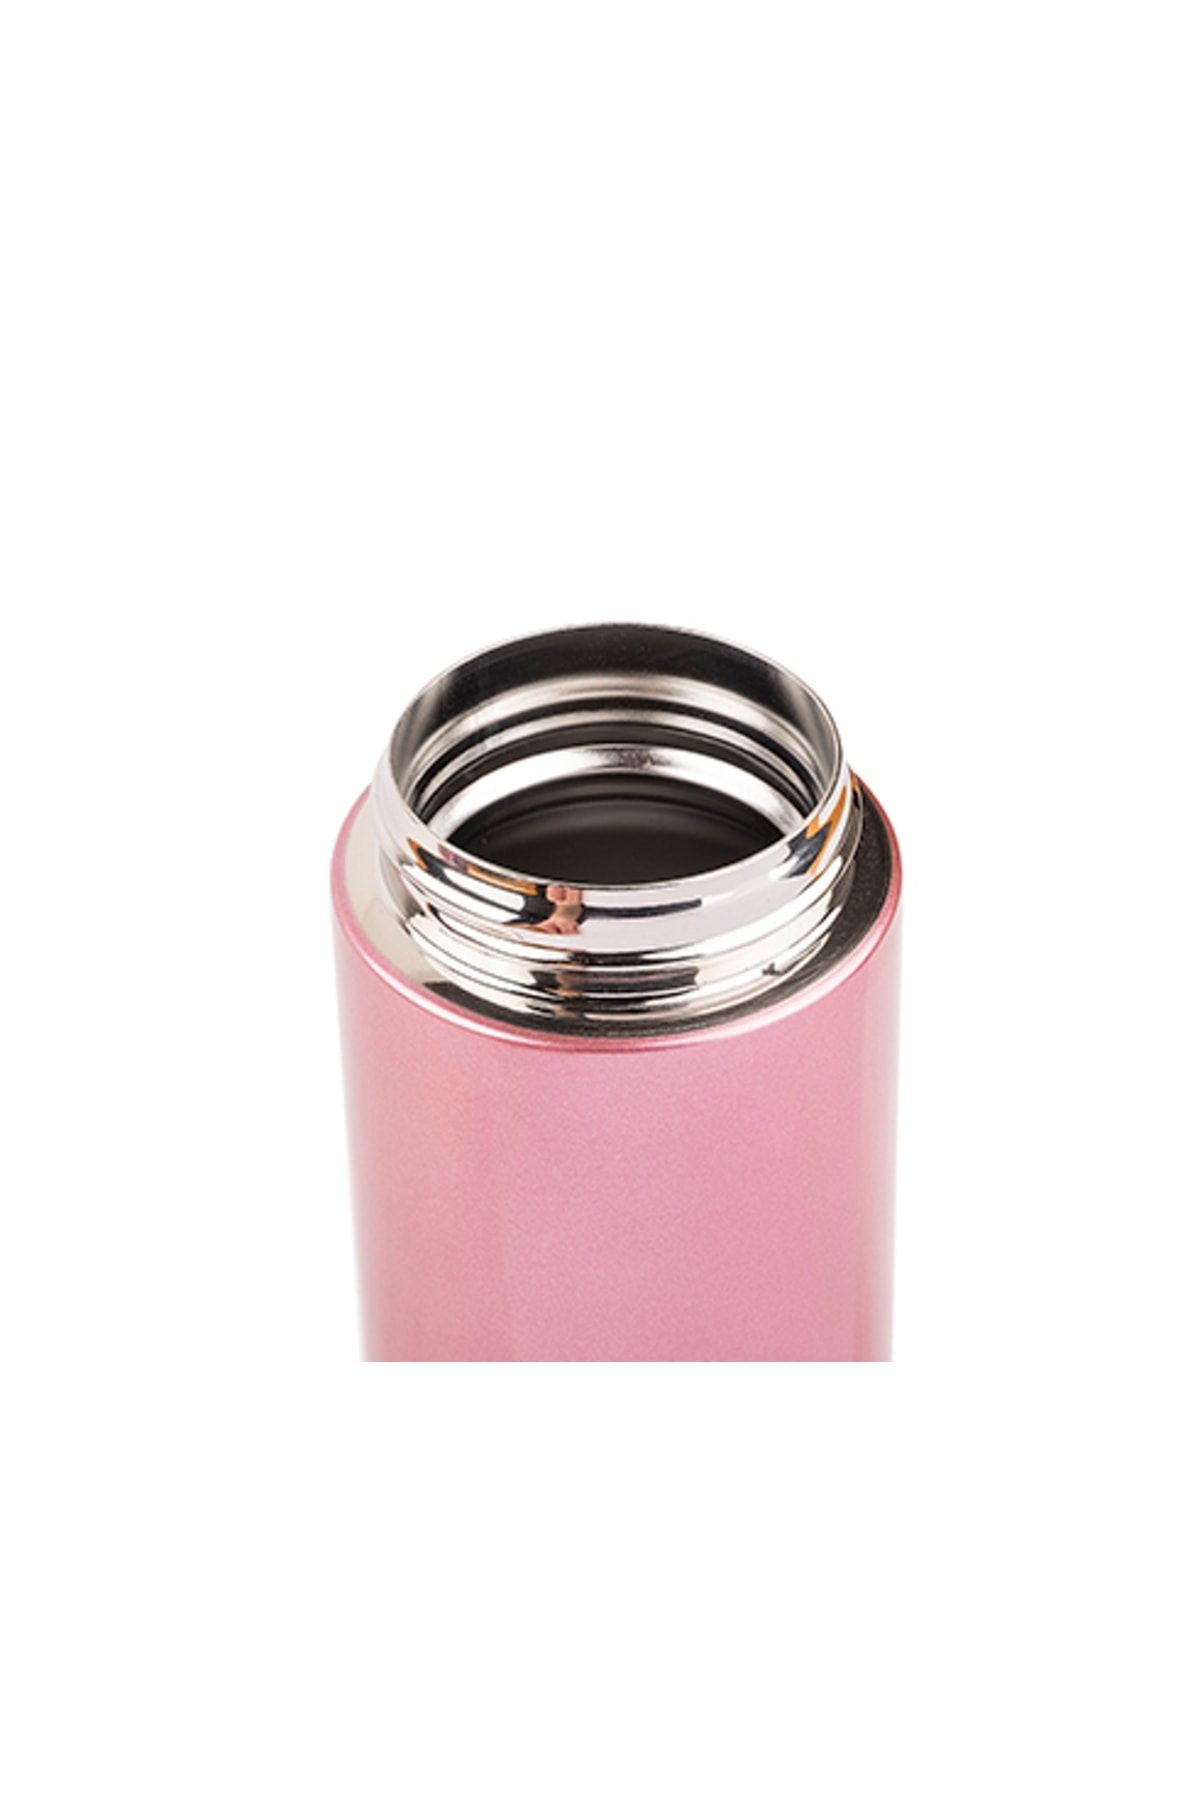 Stainless Bottle 350ml JNR-350-LP Light Pink Thermos Keeps Drinks Hot/ –